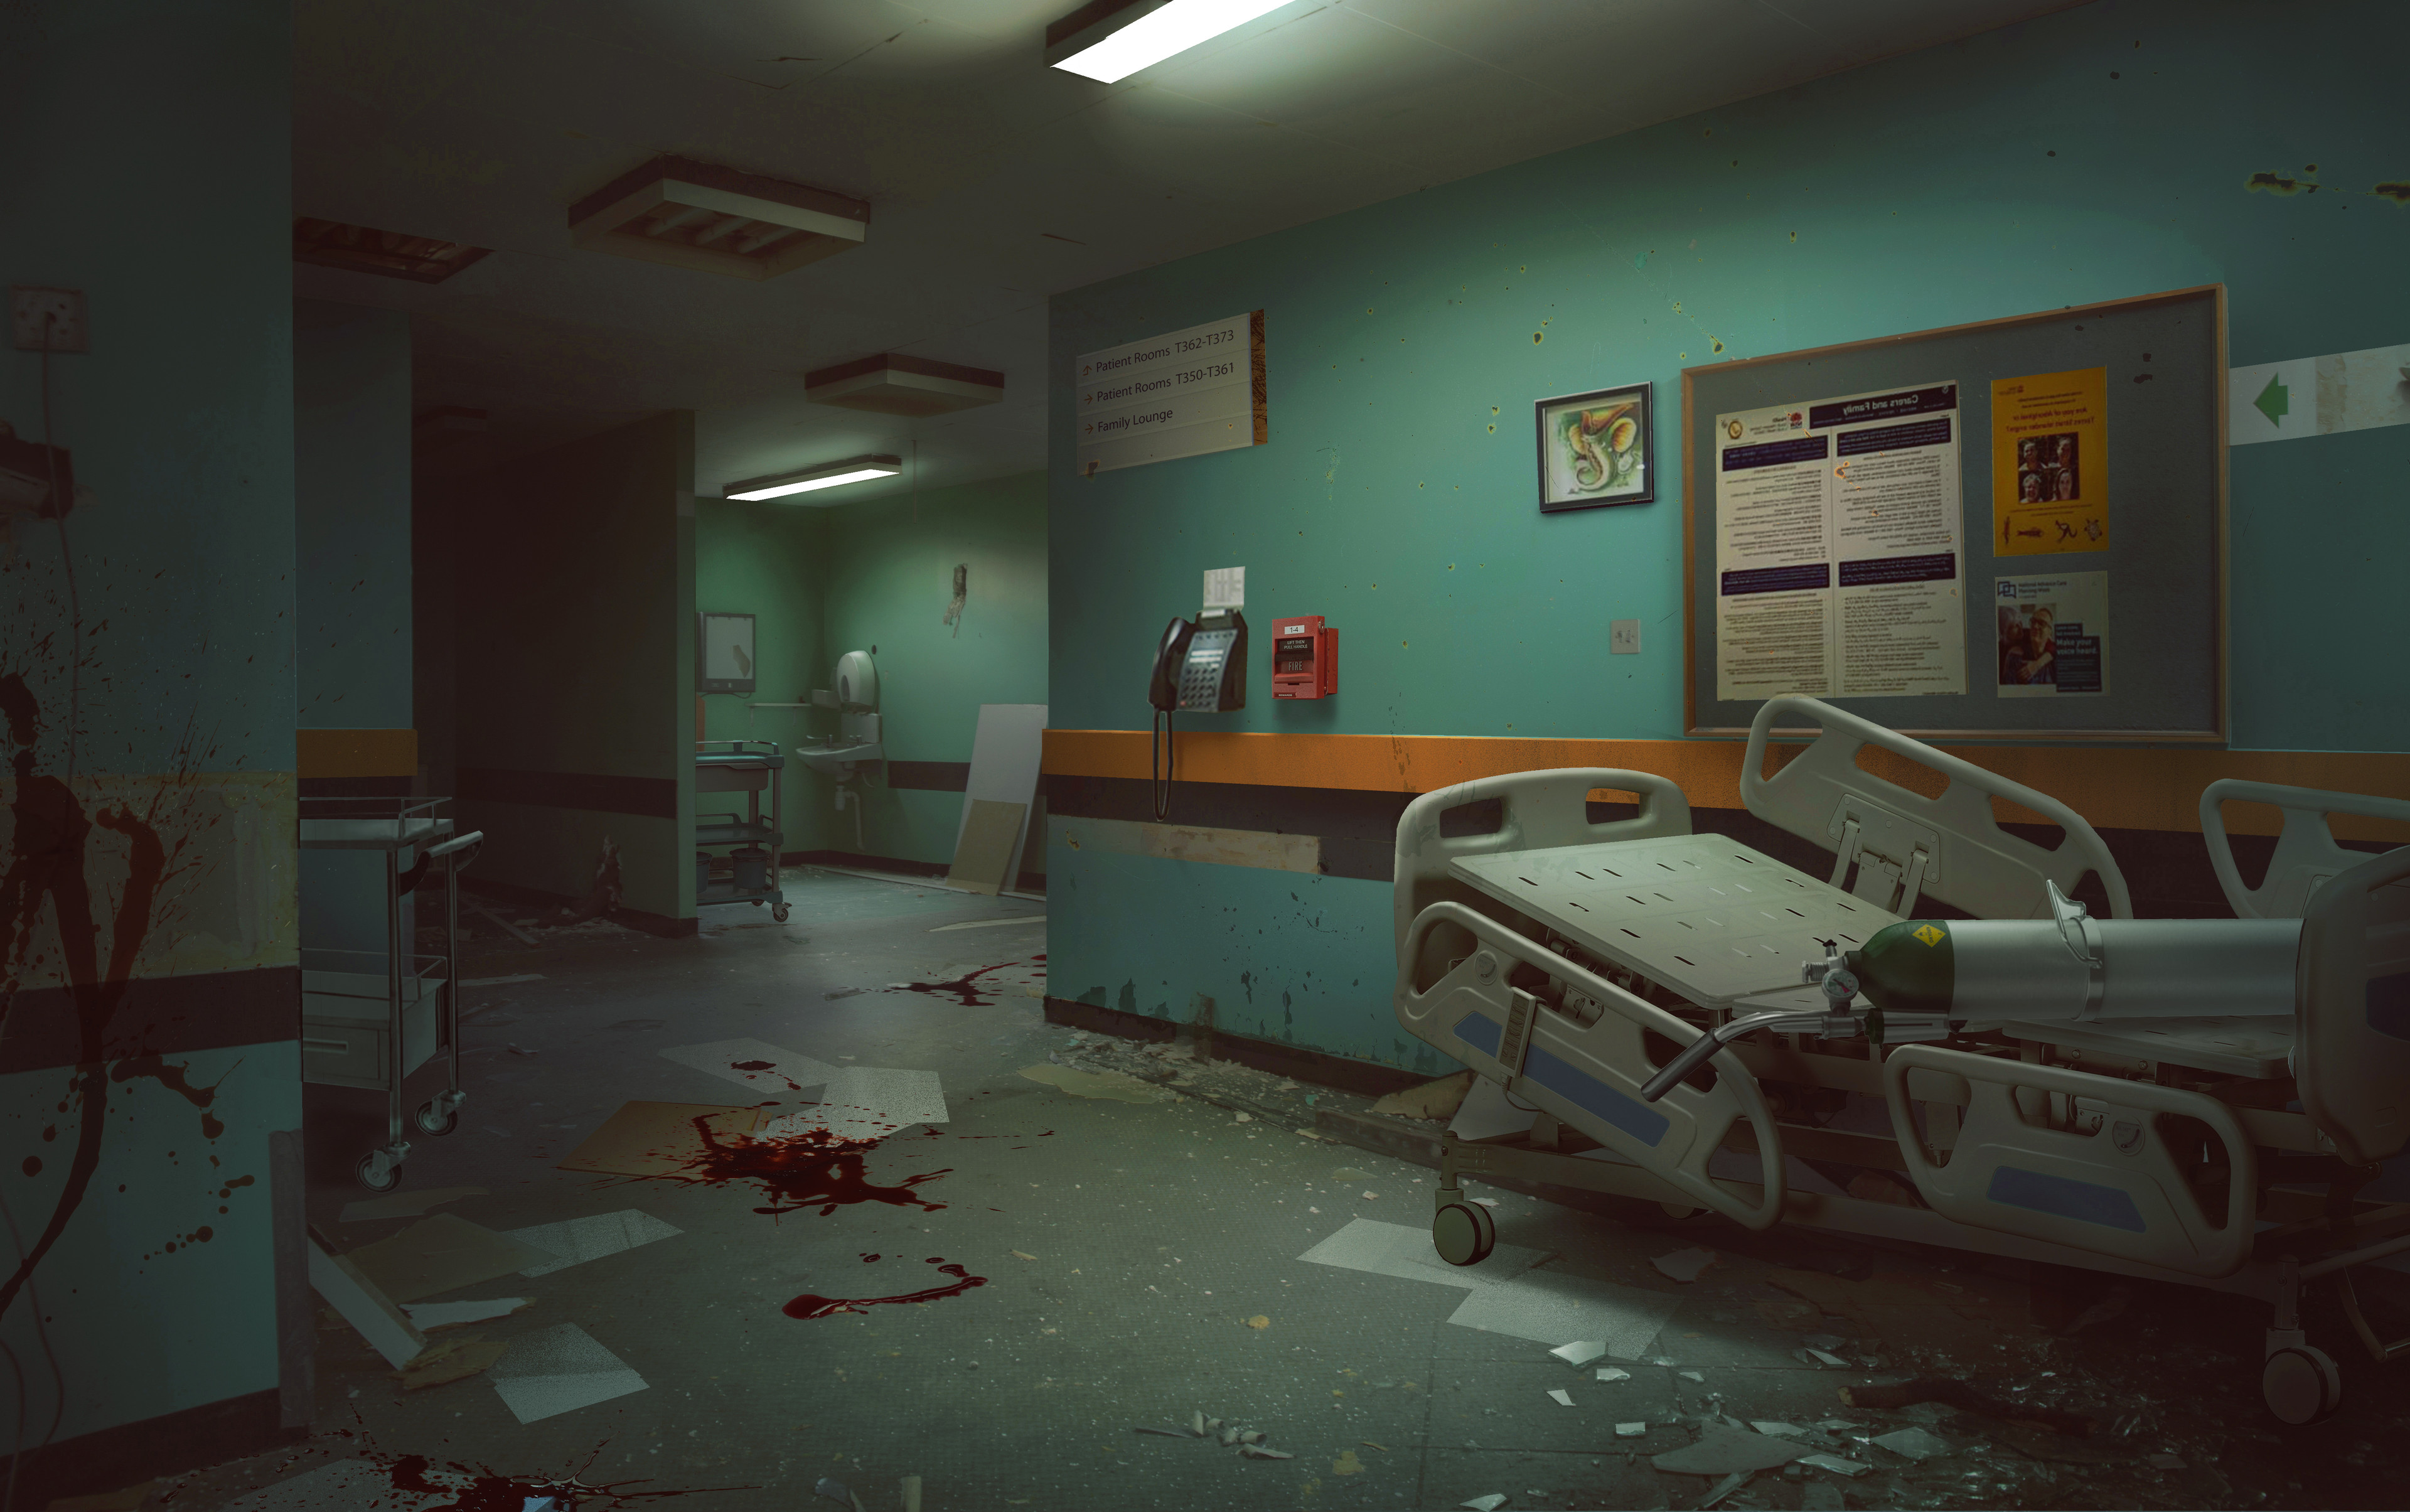 Apocalyptic hospital - 3 days after the disaster 